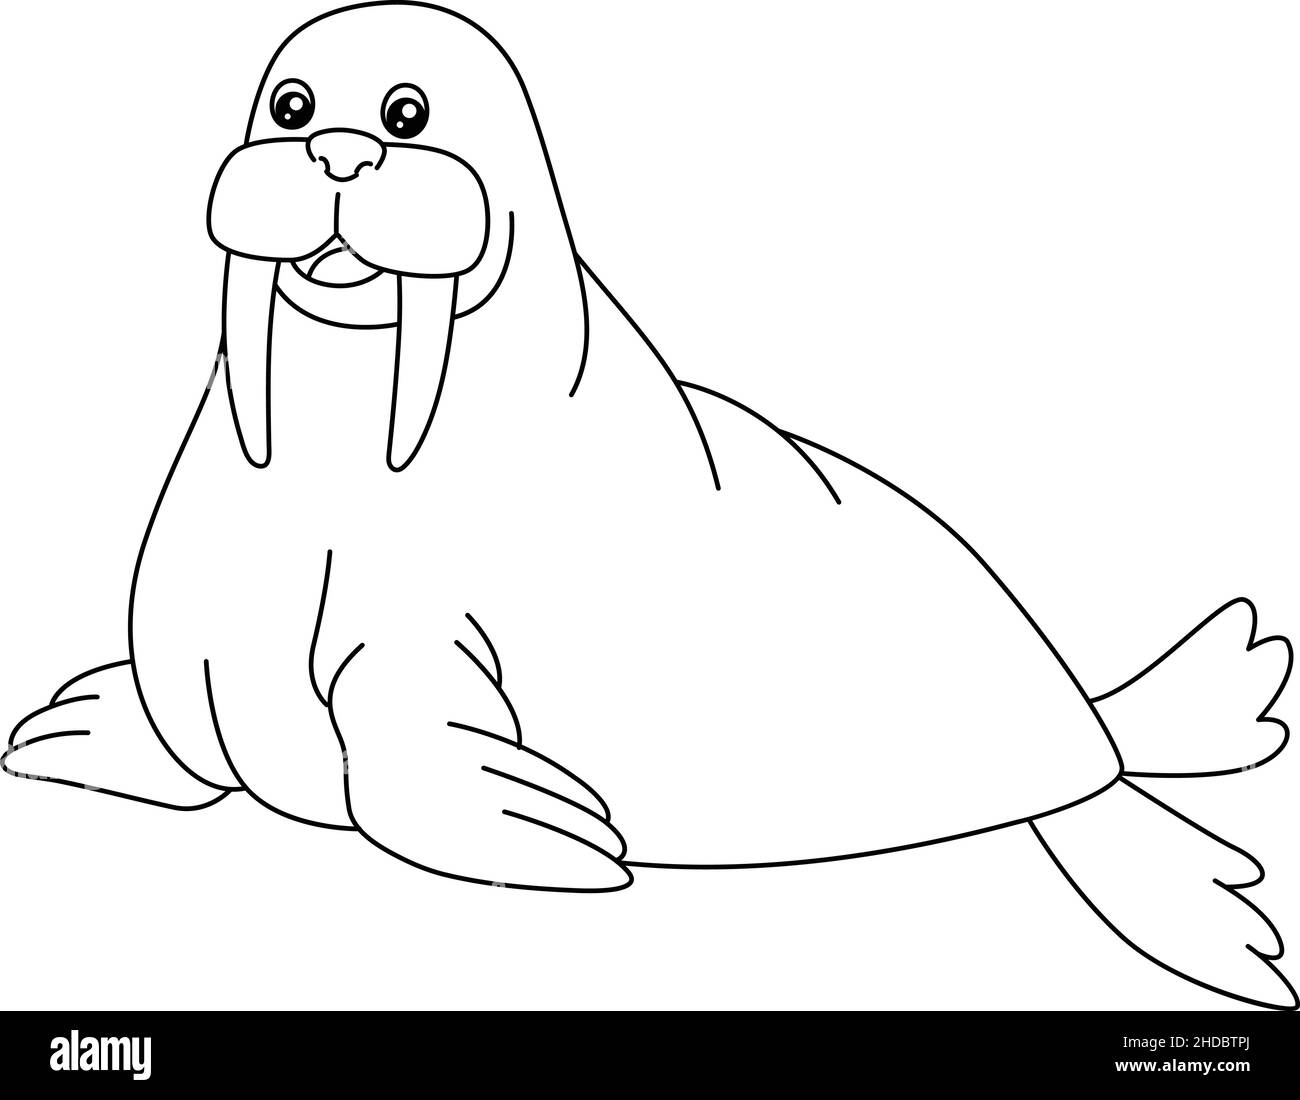 Walrus Coloring Page Isolated for Kids Stock Vector